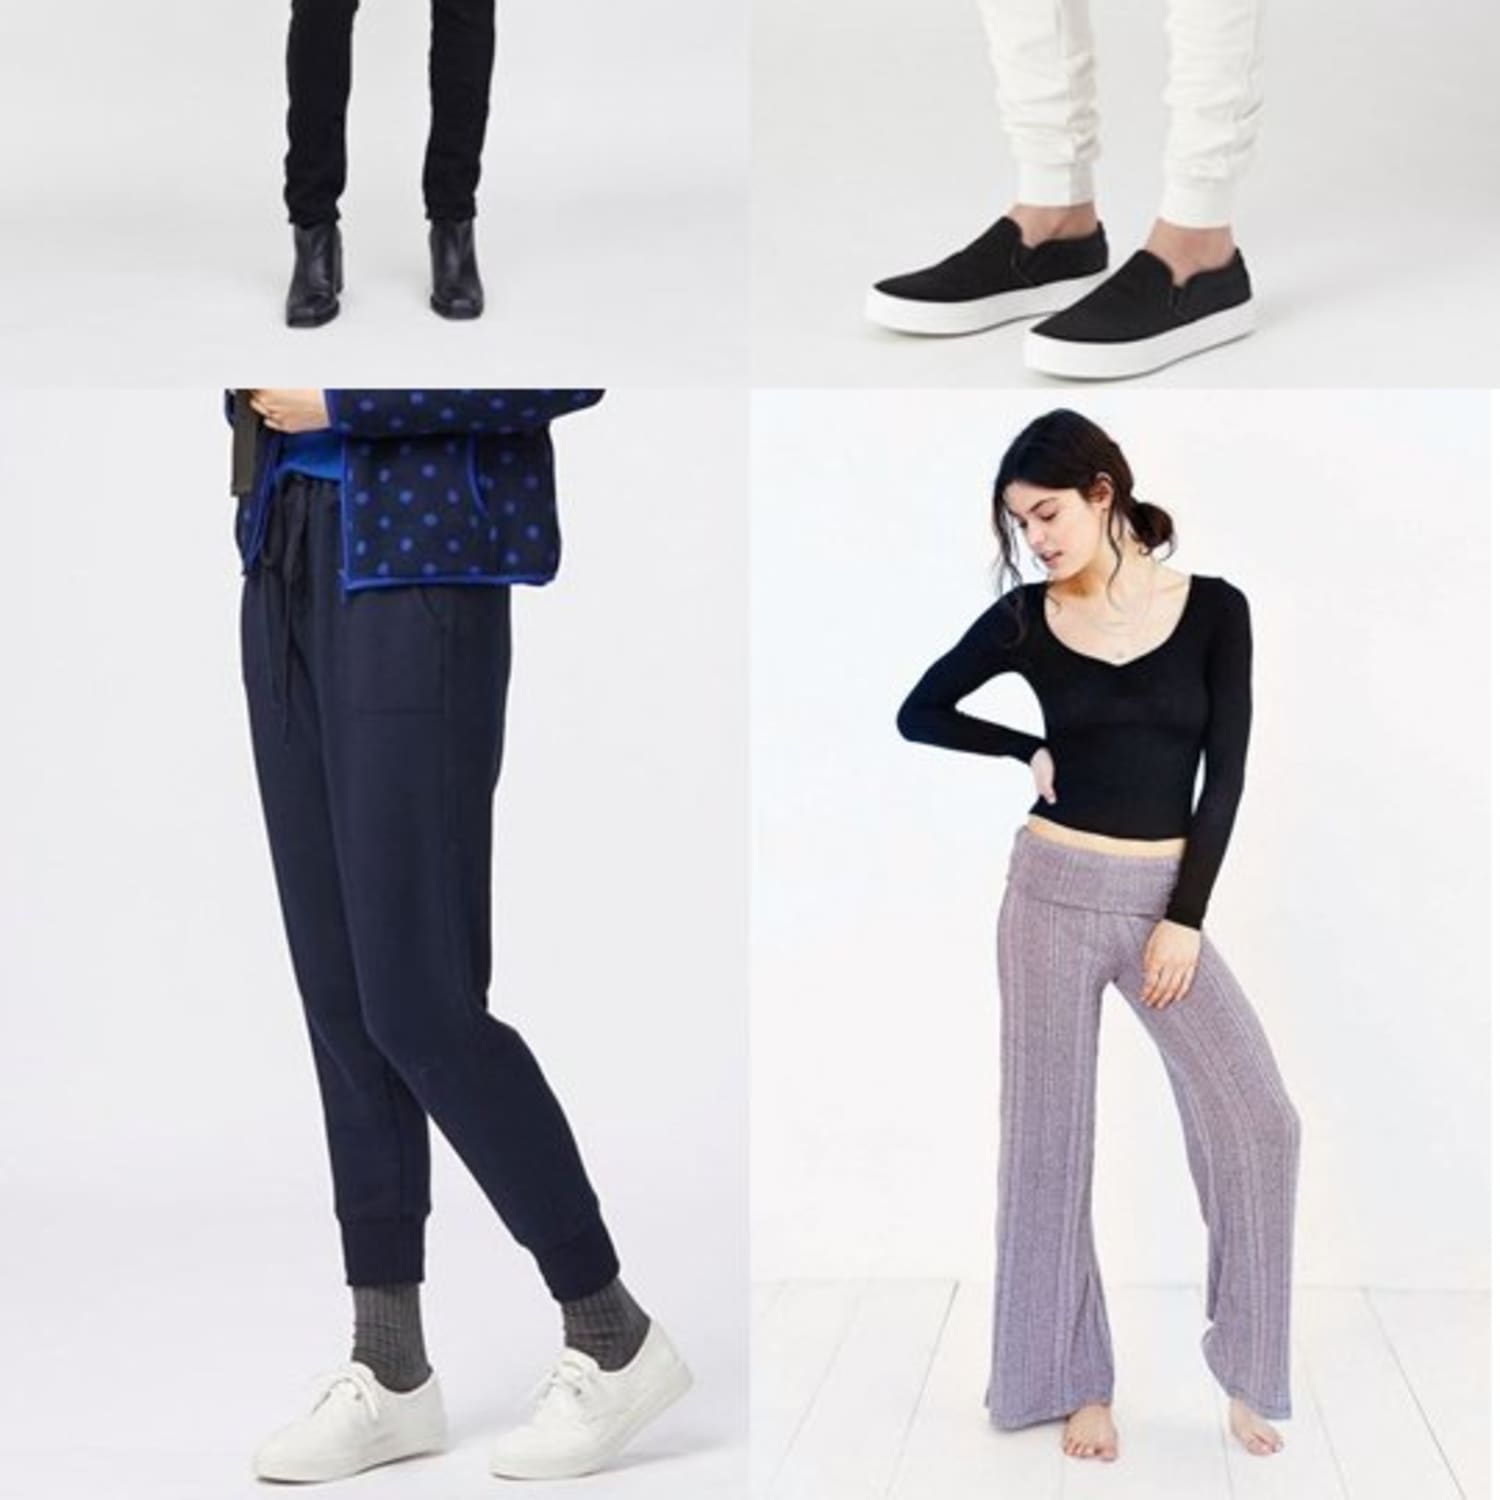 10 Stylish Pairs of Sweatpants You Can Wear to Thanksgiving Dinner